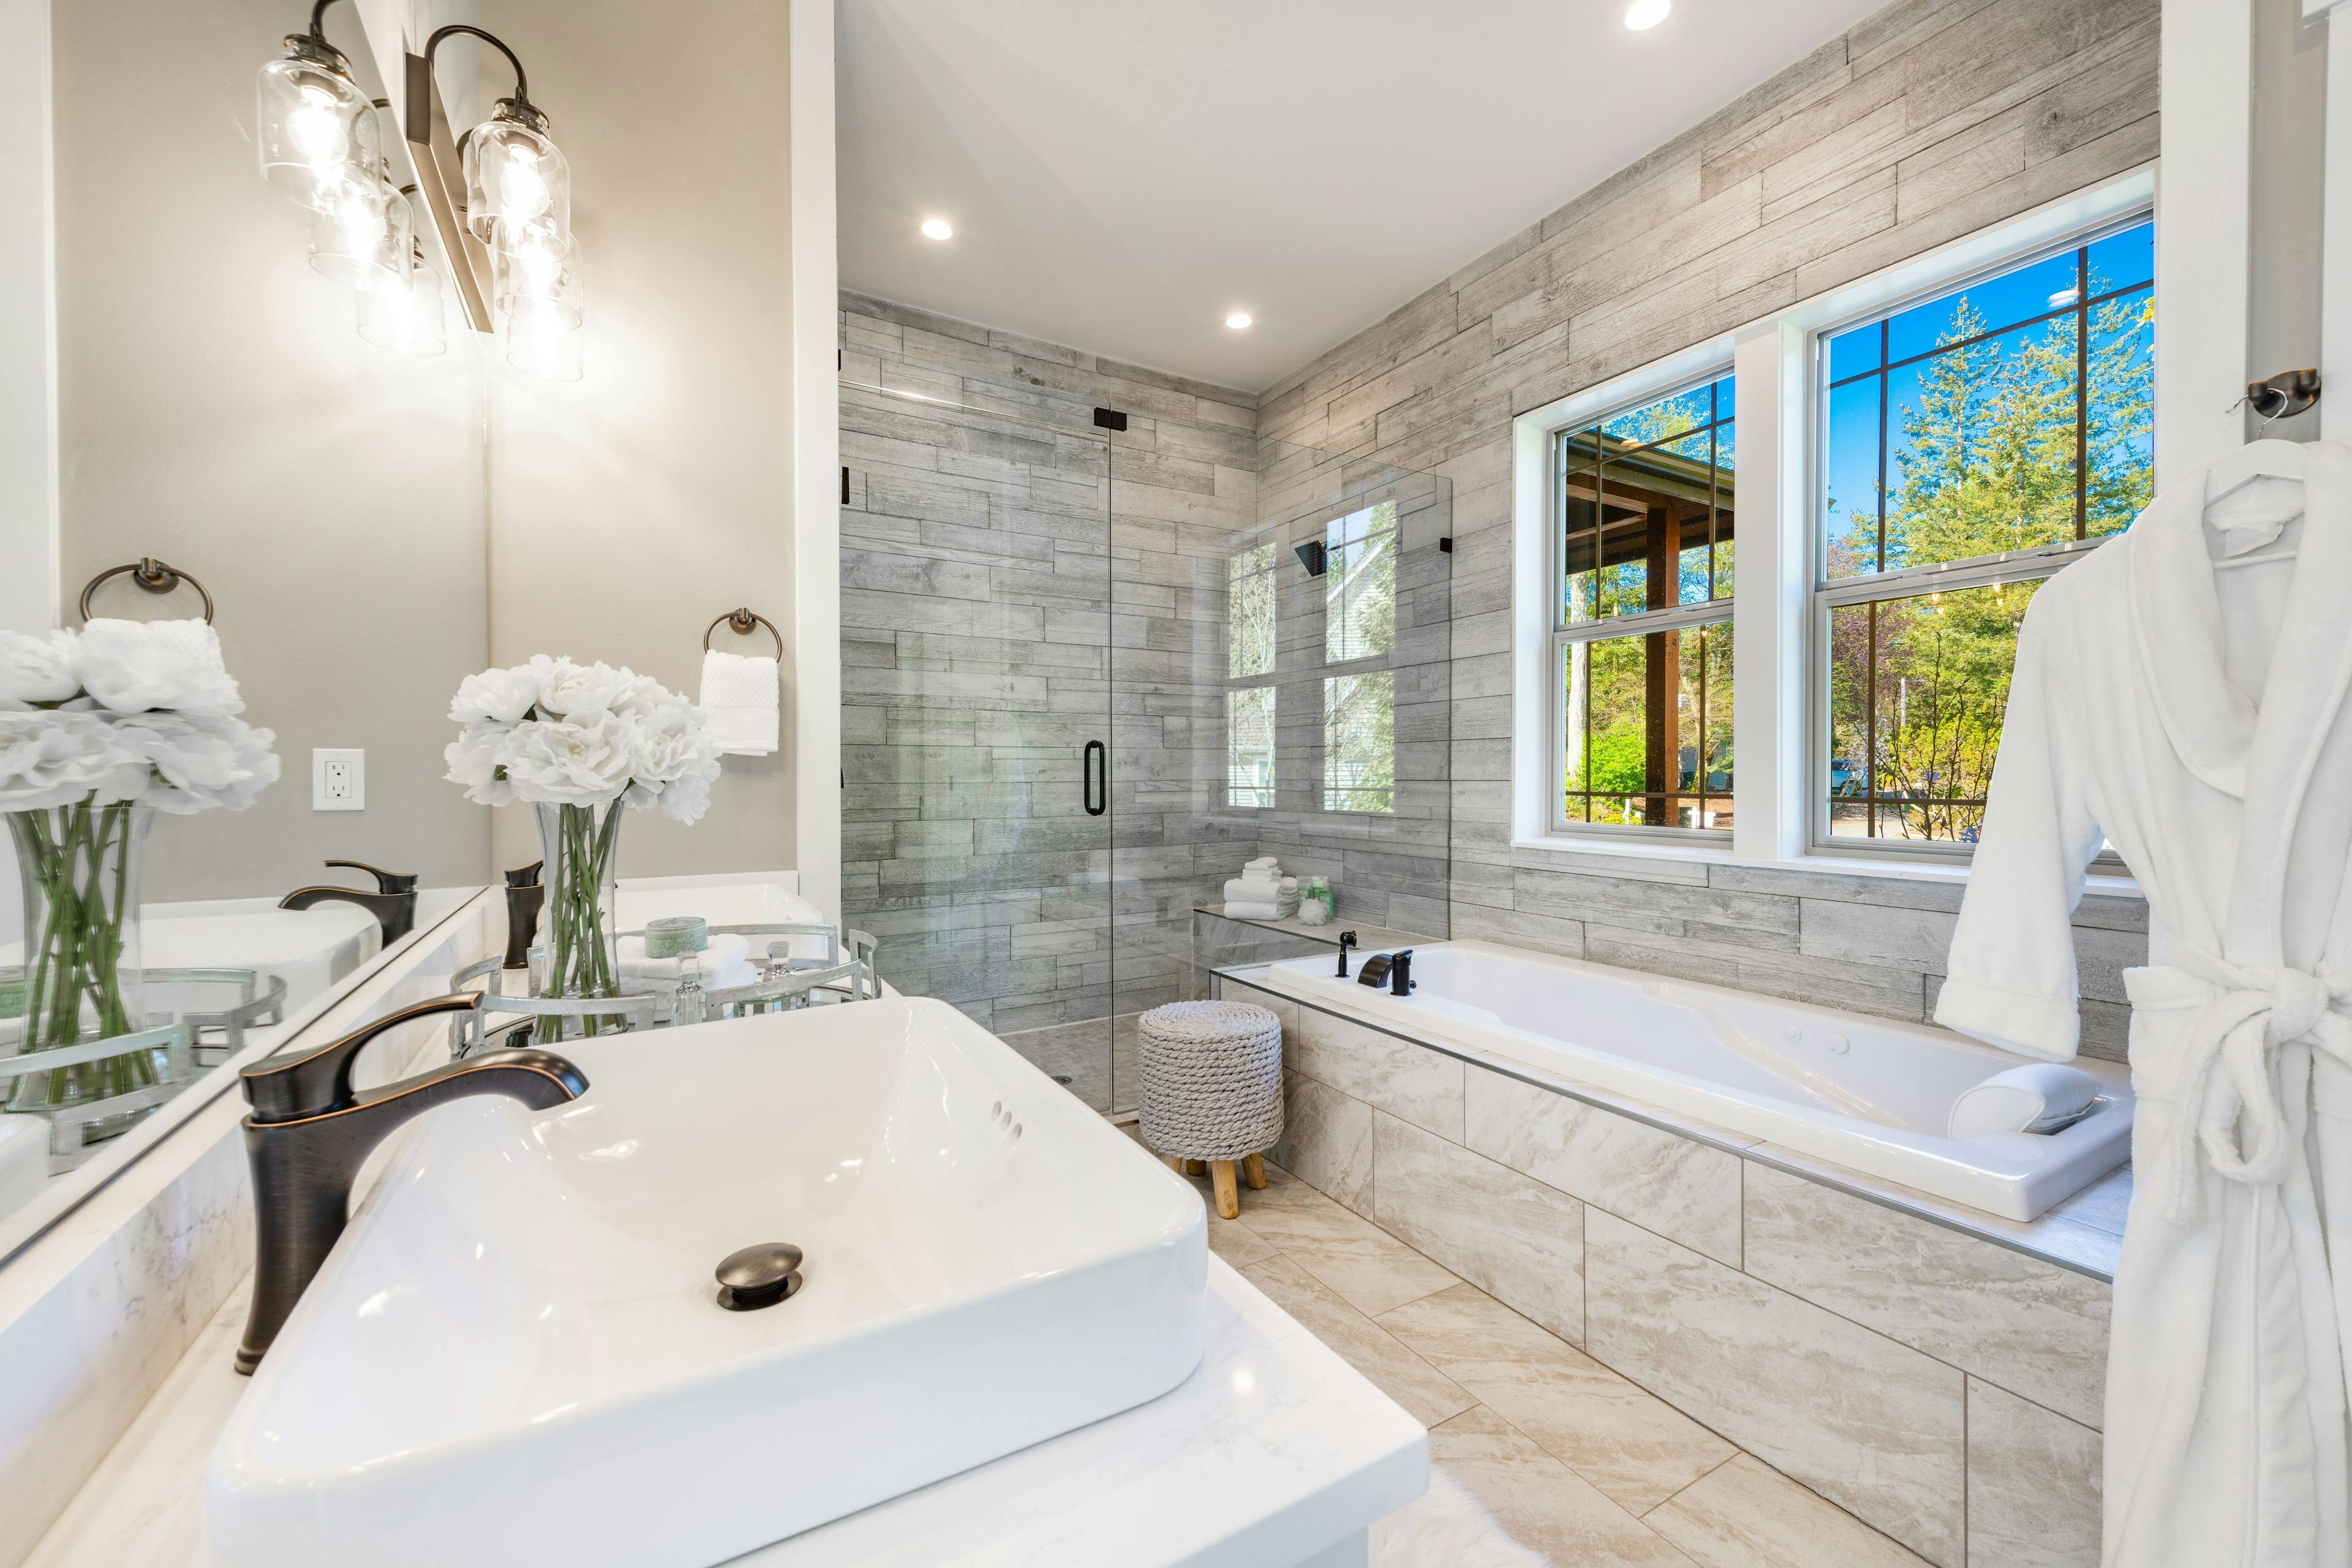 Bathroom setting with a view of the sink, bathtub, and a shower door in the background, with a window on one side